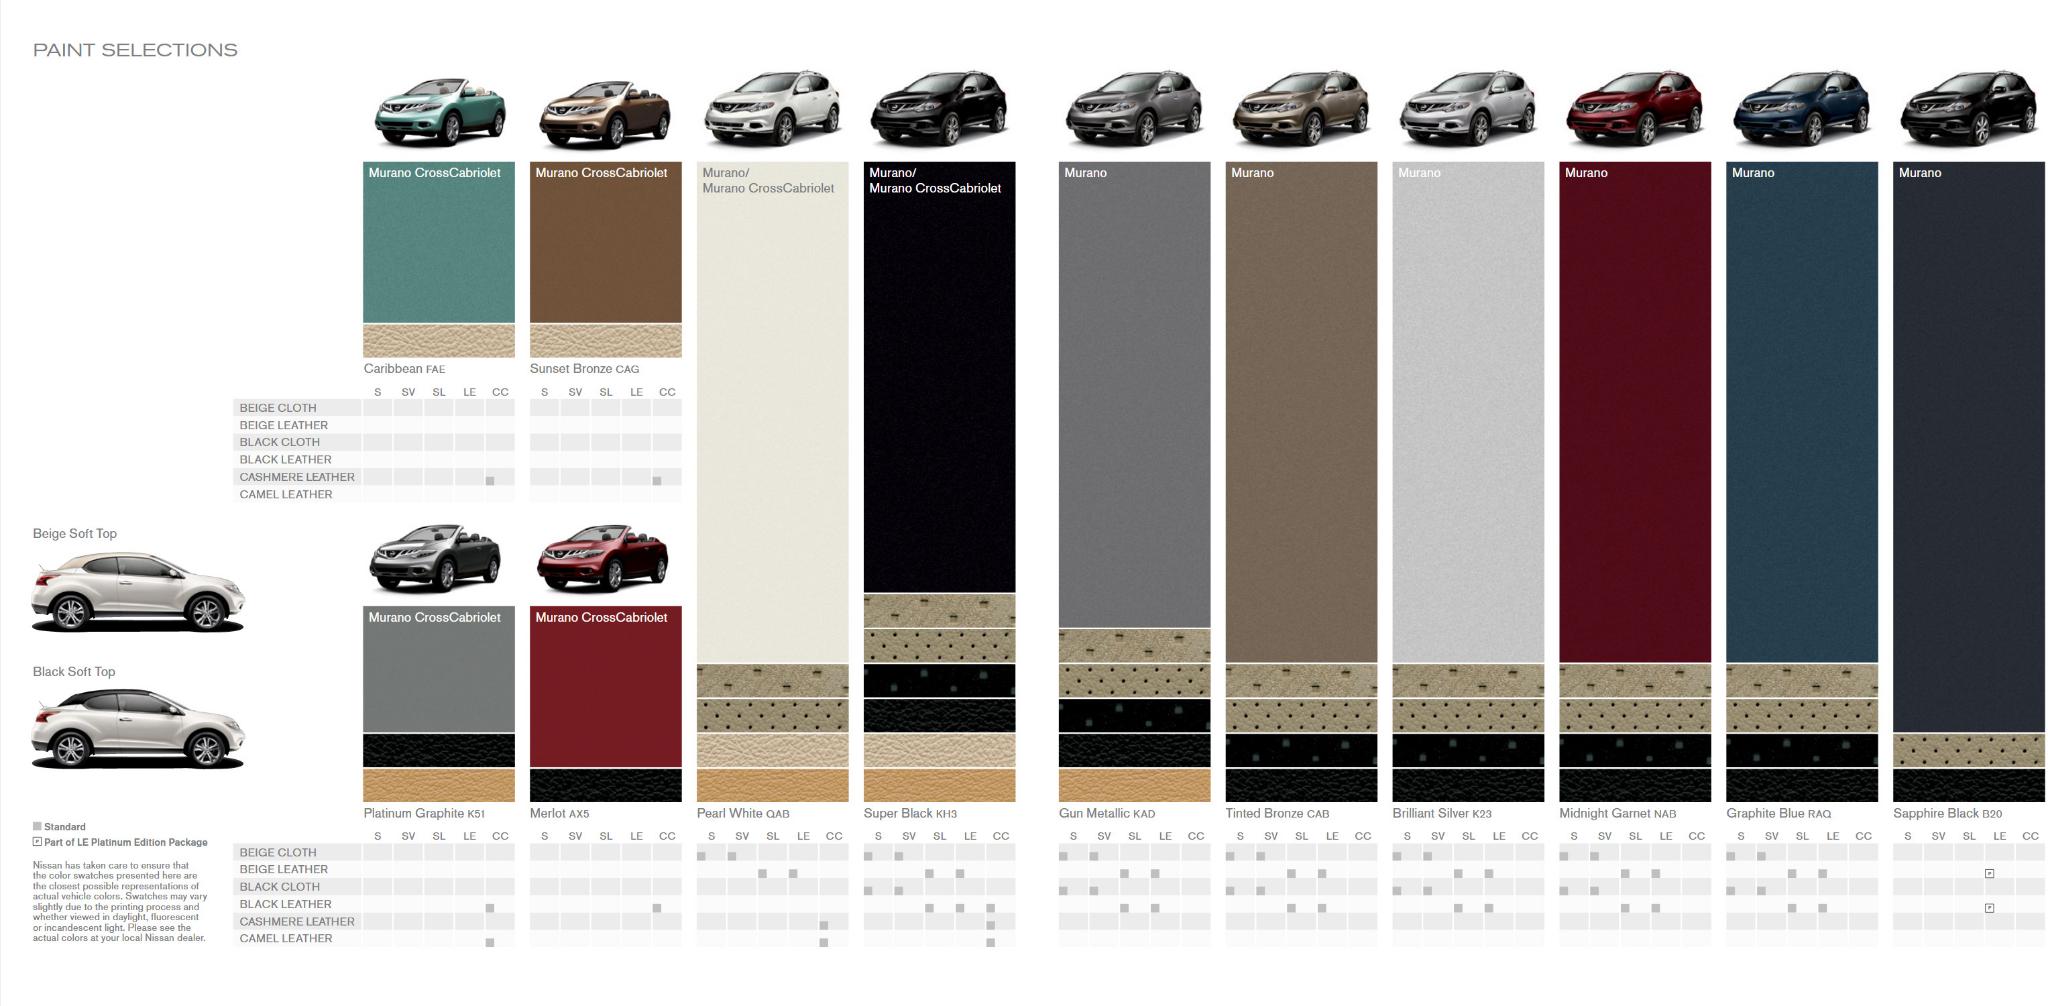 Exterior colors used on a Nissan Murano vehicle